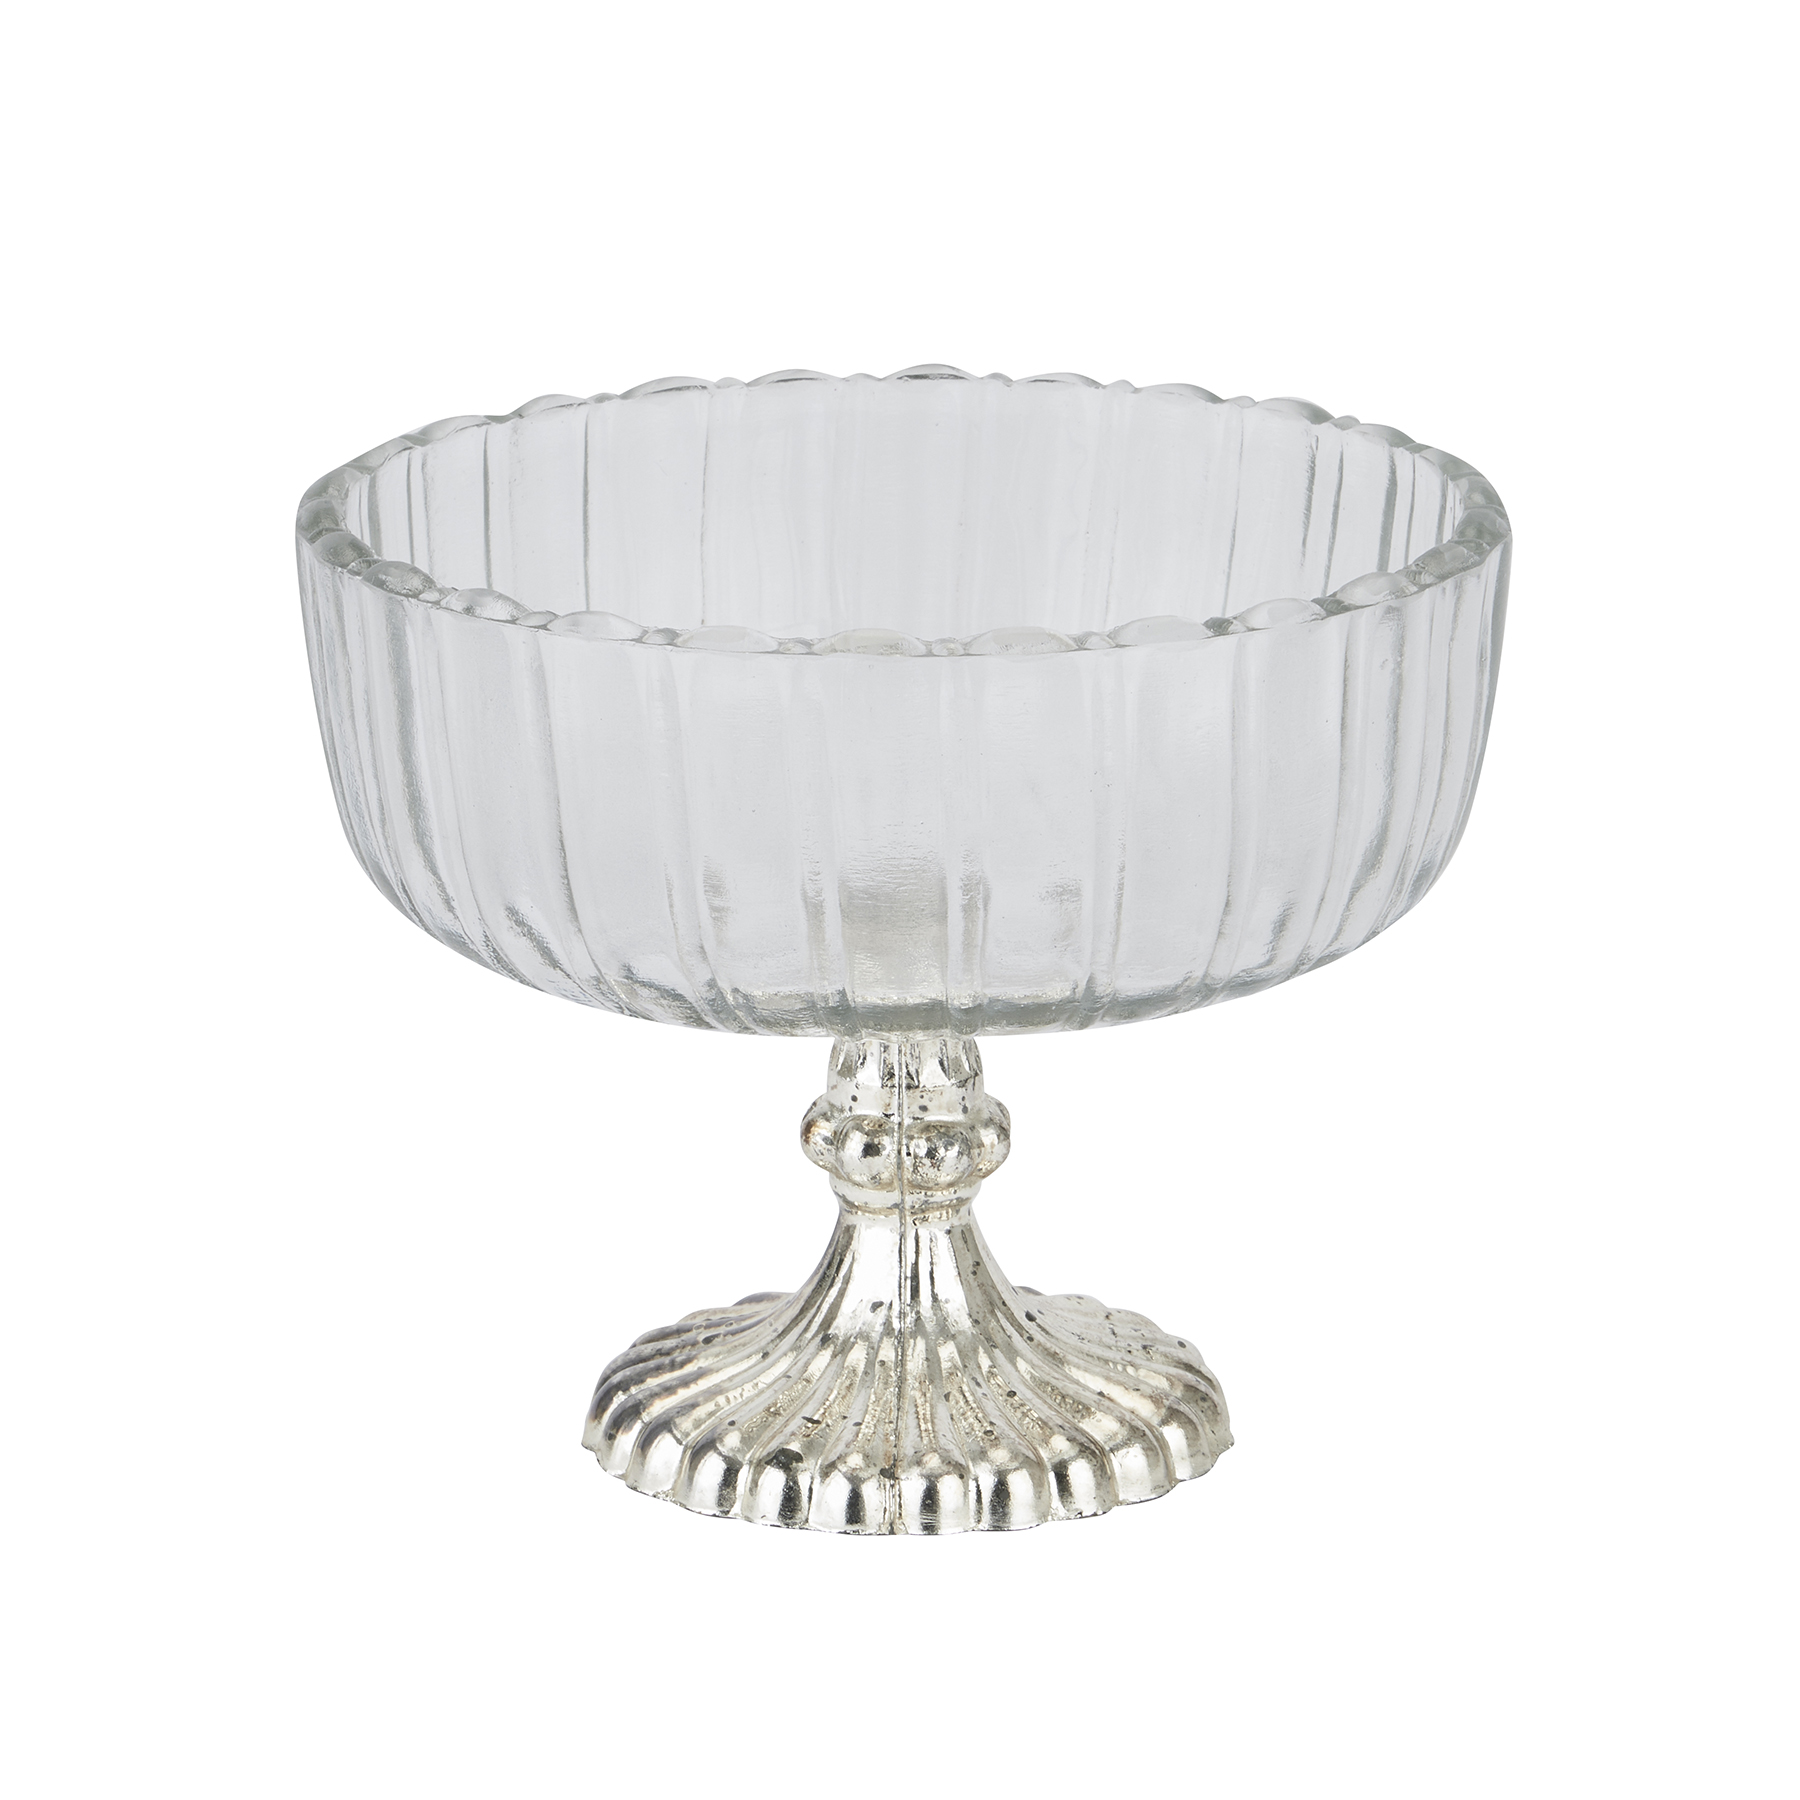 Small Fluted Glass Display Bowl - Image 1